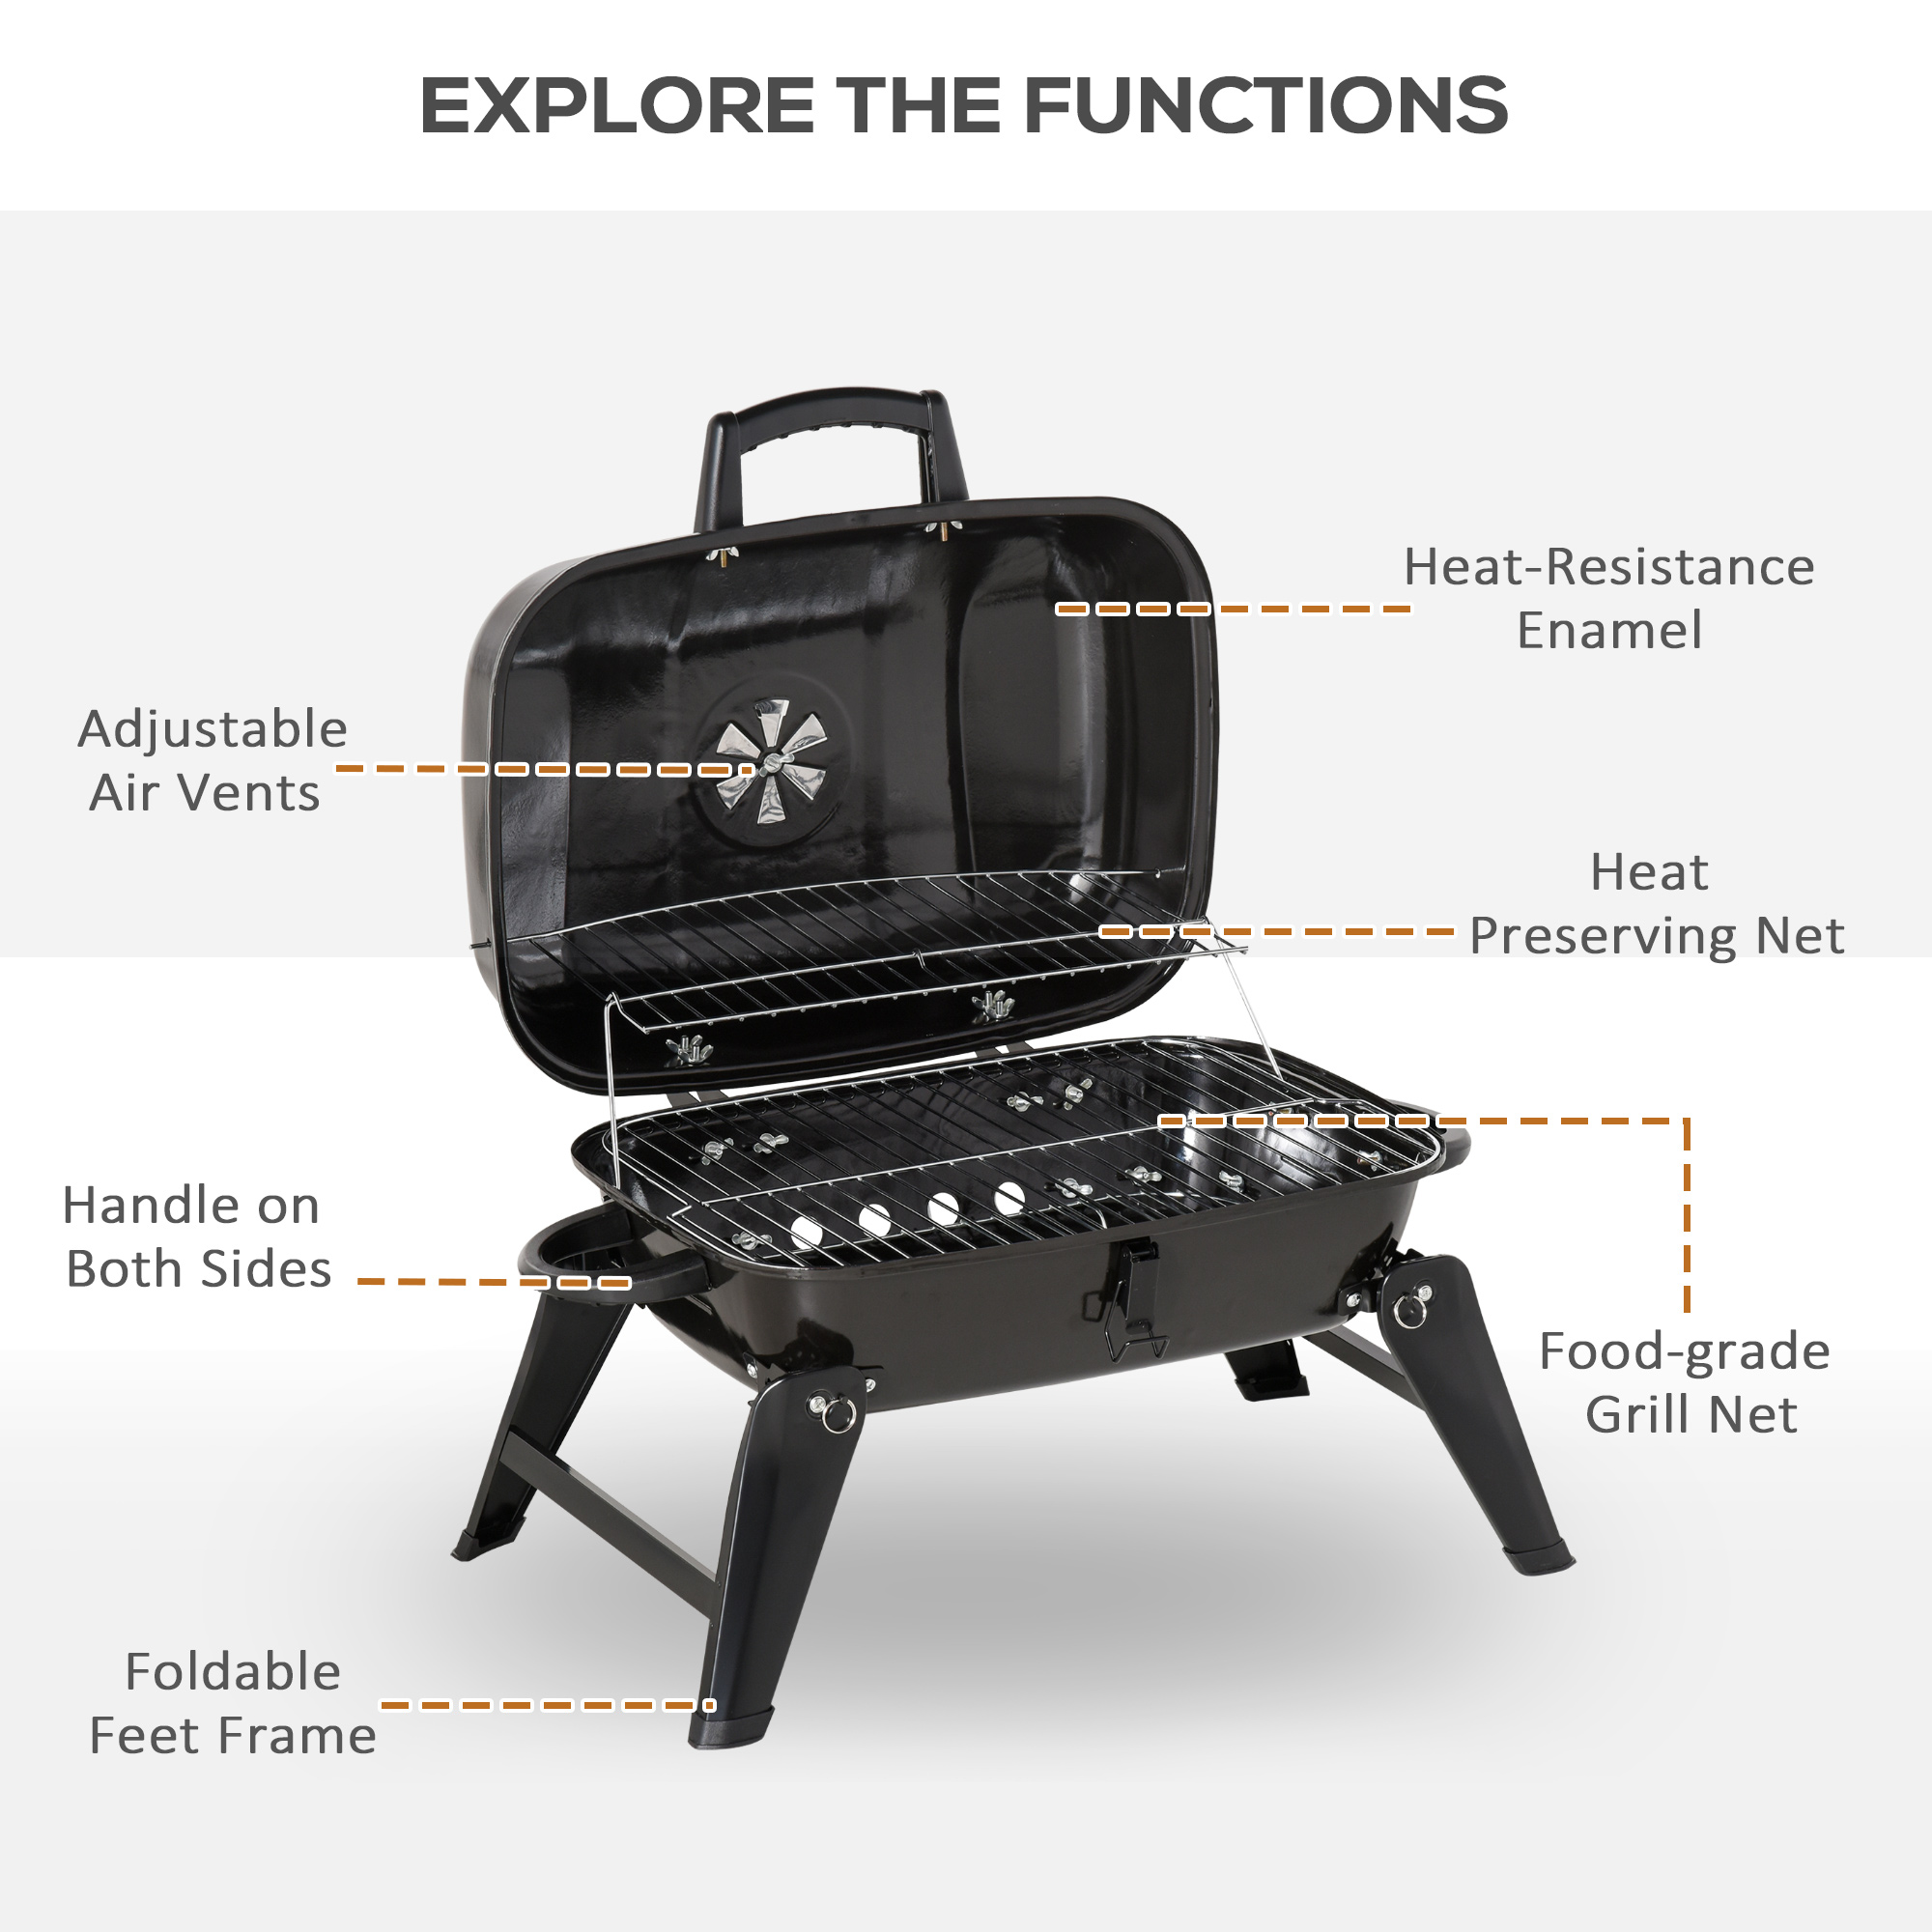 Outsunny 14" Portable Charcoal Grill, Tabletop Small BBQ Grill for Outdoor Cooking, Camping, Tailgating, Enamel Coated, Vent, Folding Legs, Black - image 3 of 9